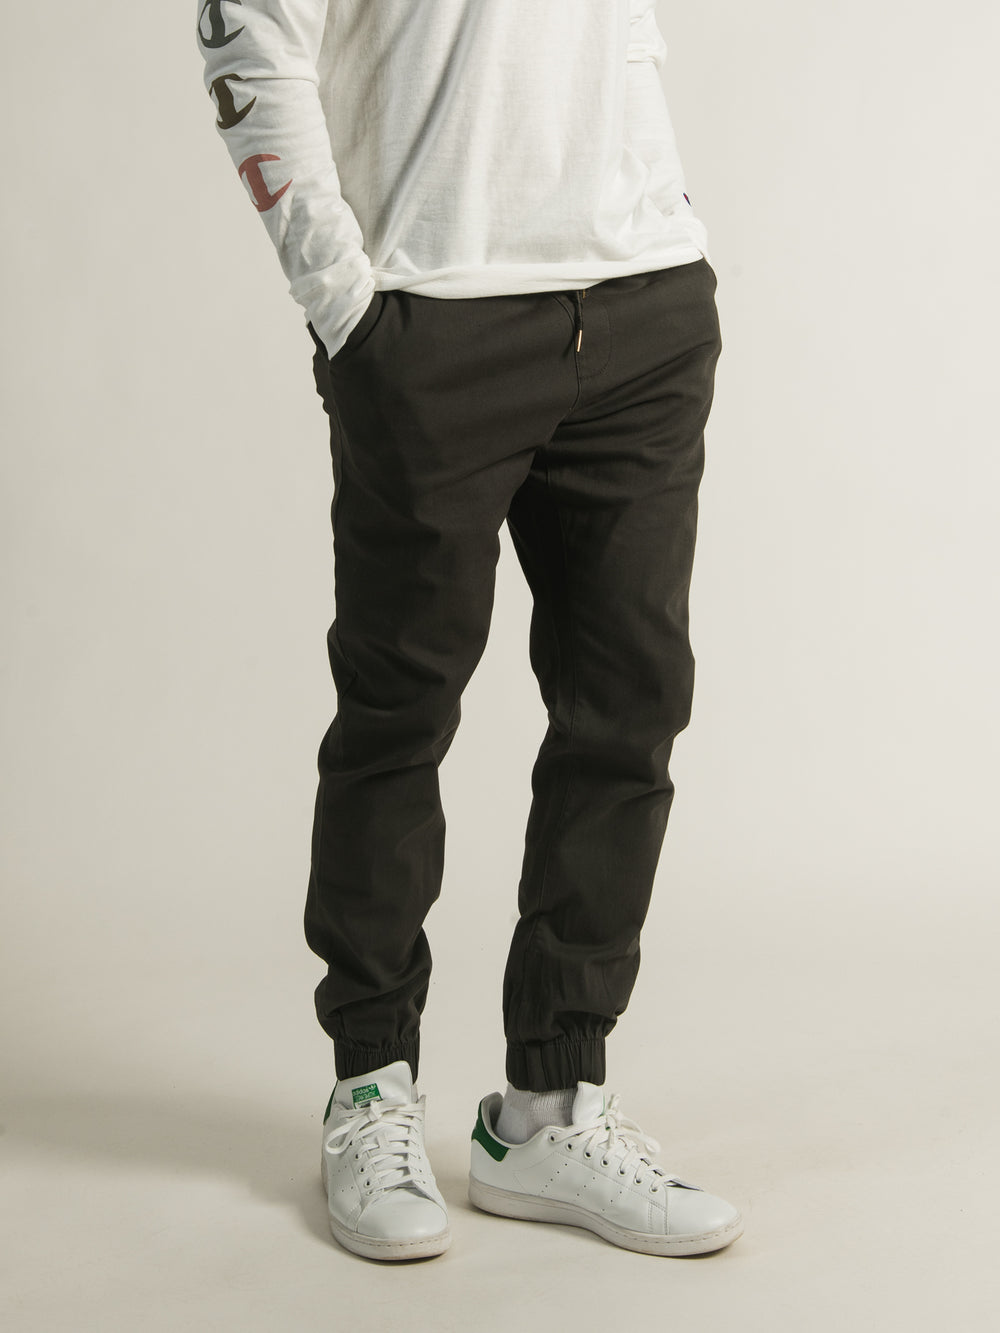 JOGGER DE RUGBY CROCKETT TAINTED - ANTHRACITE